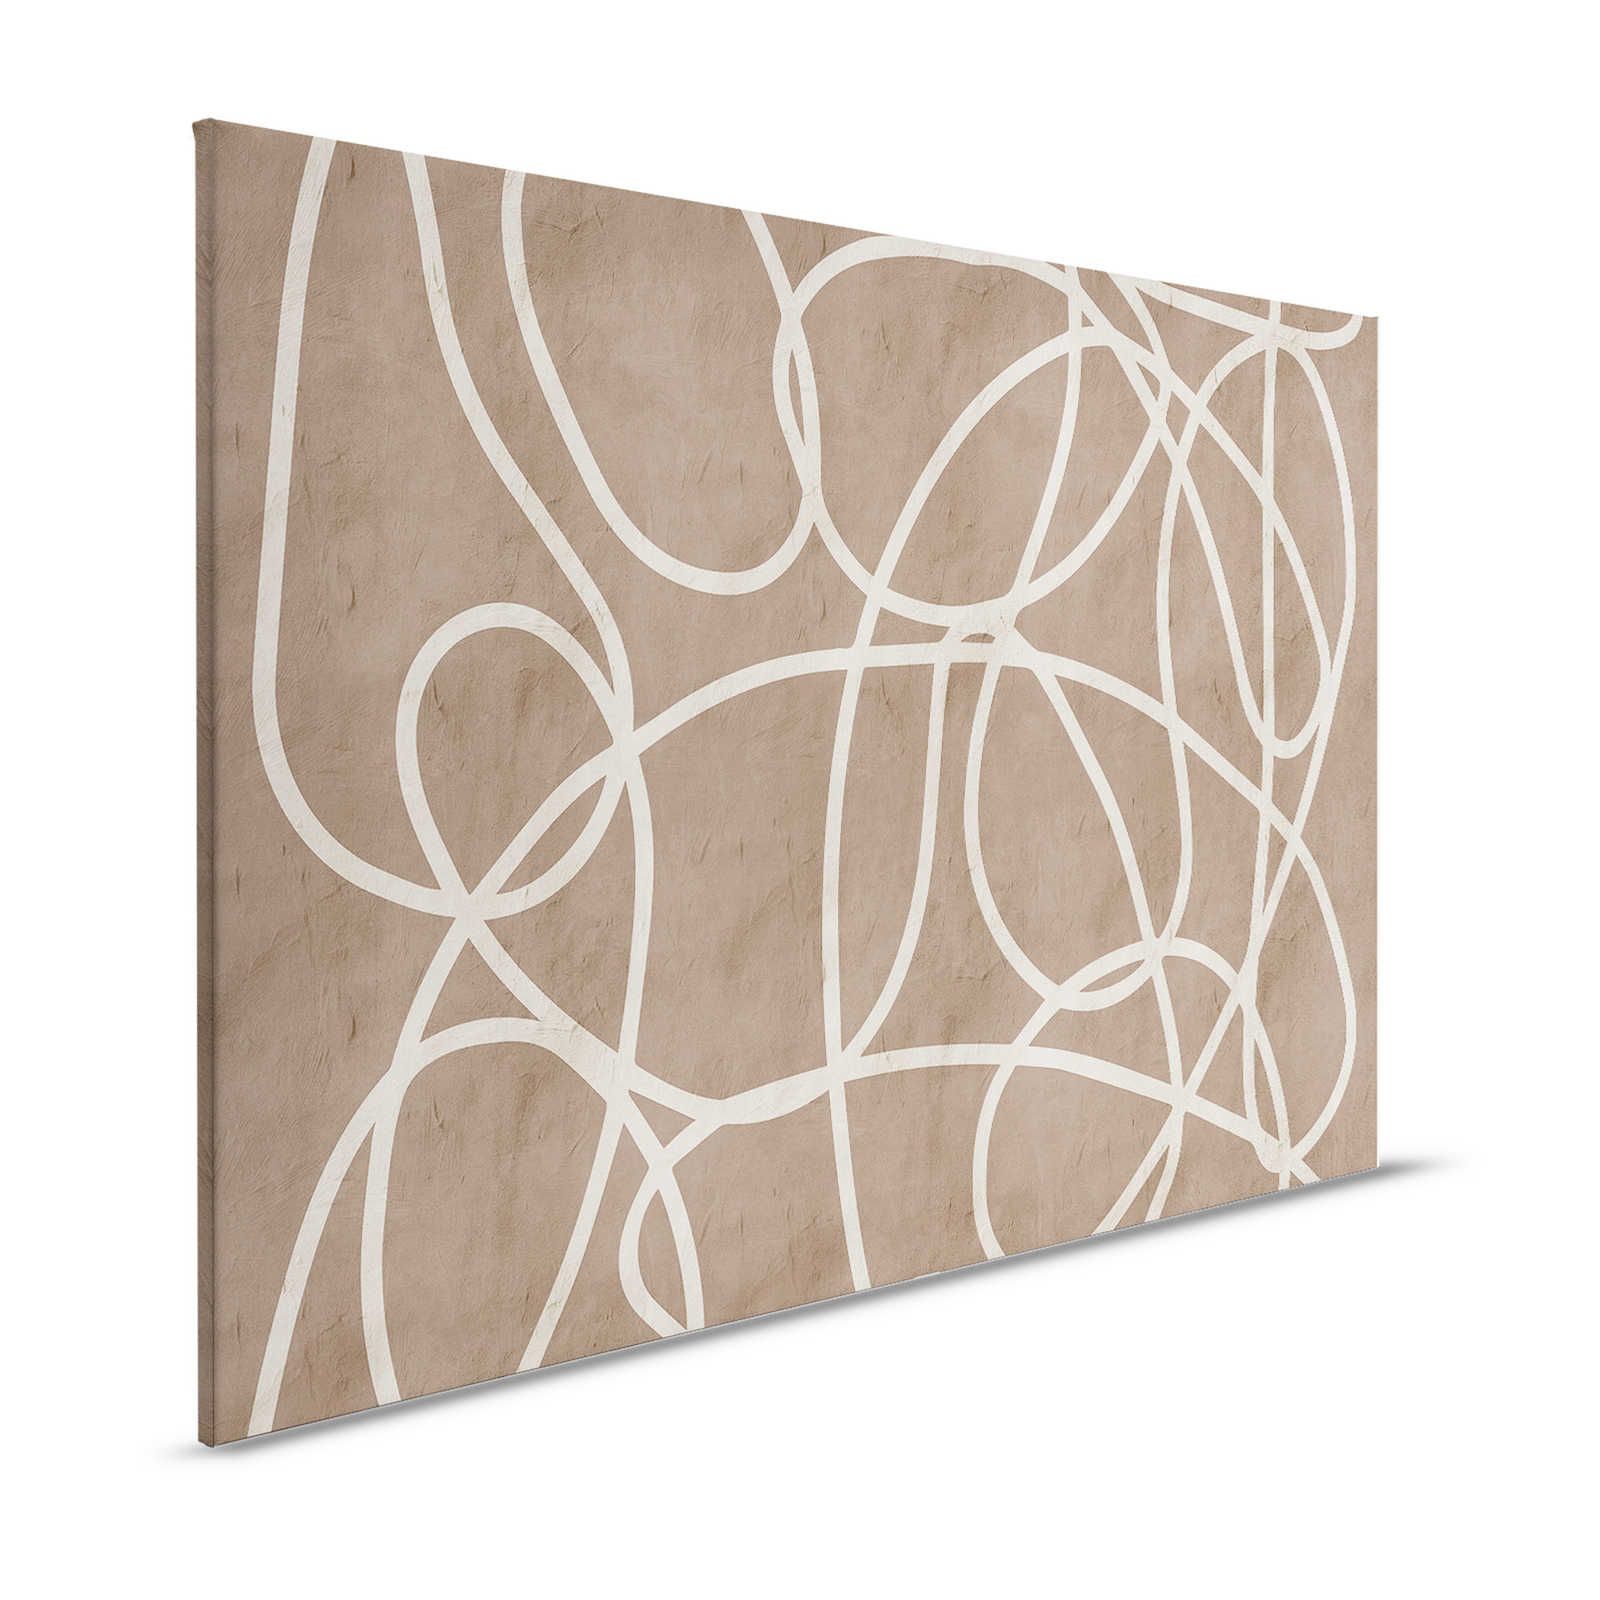 Serengeti 3 - Canvas painting Brown-Beige Clay Wall with Lines Design - 1,20 m x 0,80 m
